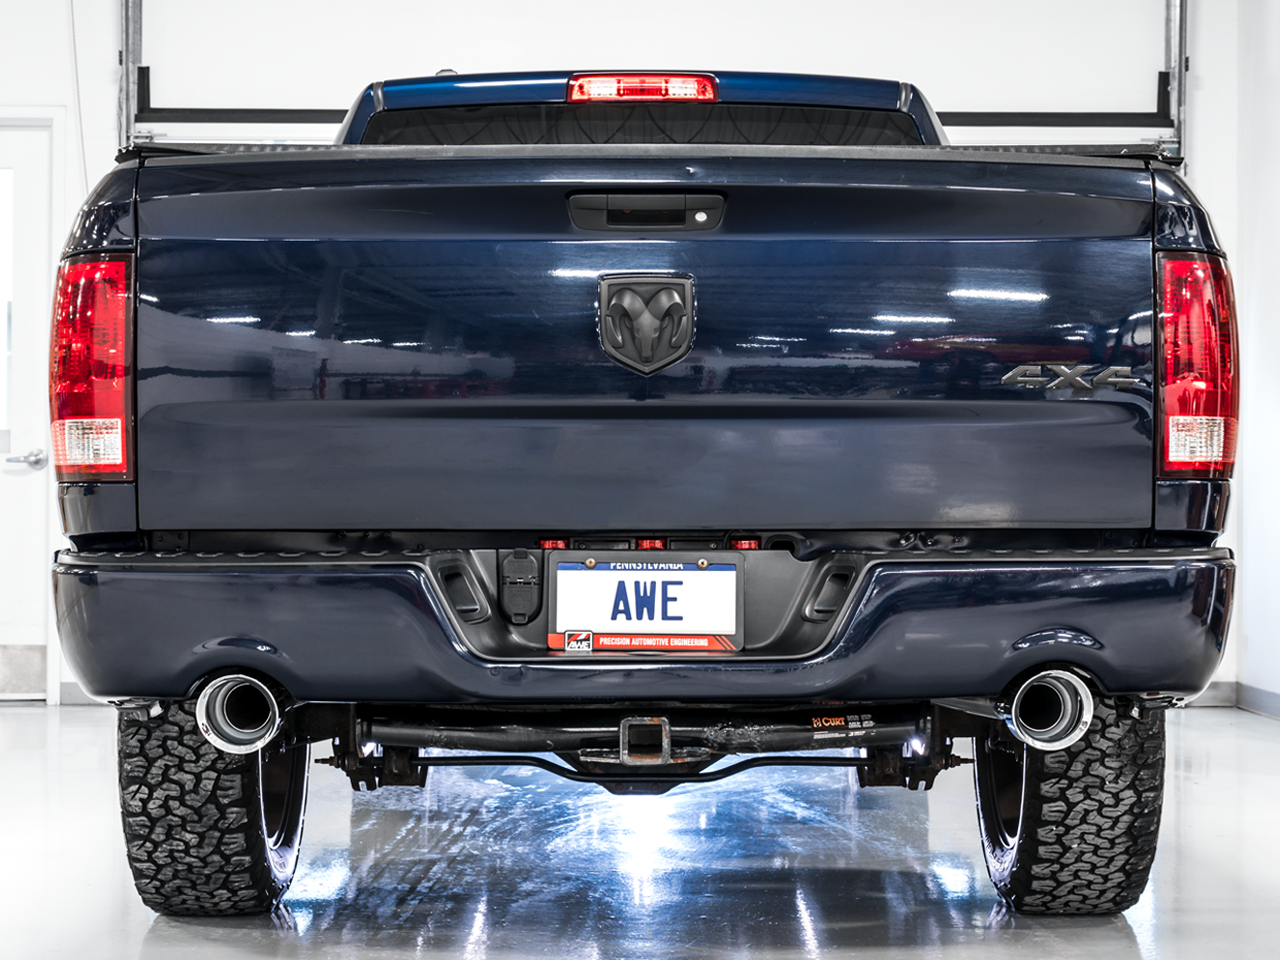 AWE 0FG Dual Rear Exit Catback Exhaust for 4th Gen RAM 1500 5.7L (with bumper cutouts) - Chrome Silver Tips (3015-32002)